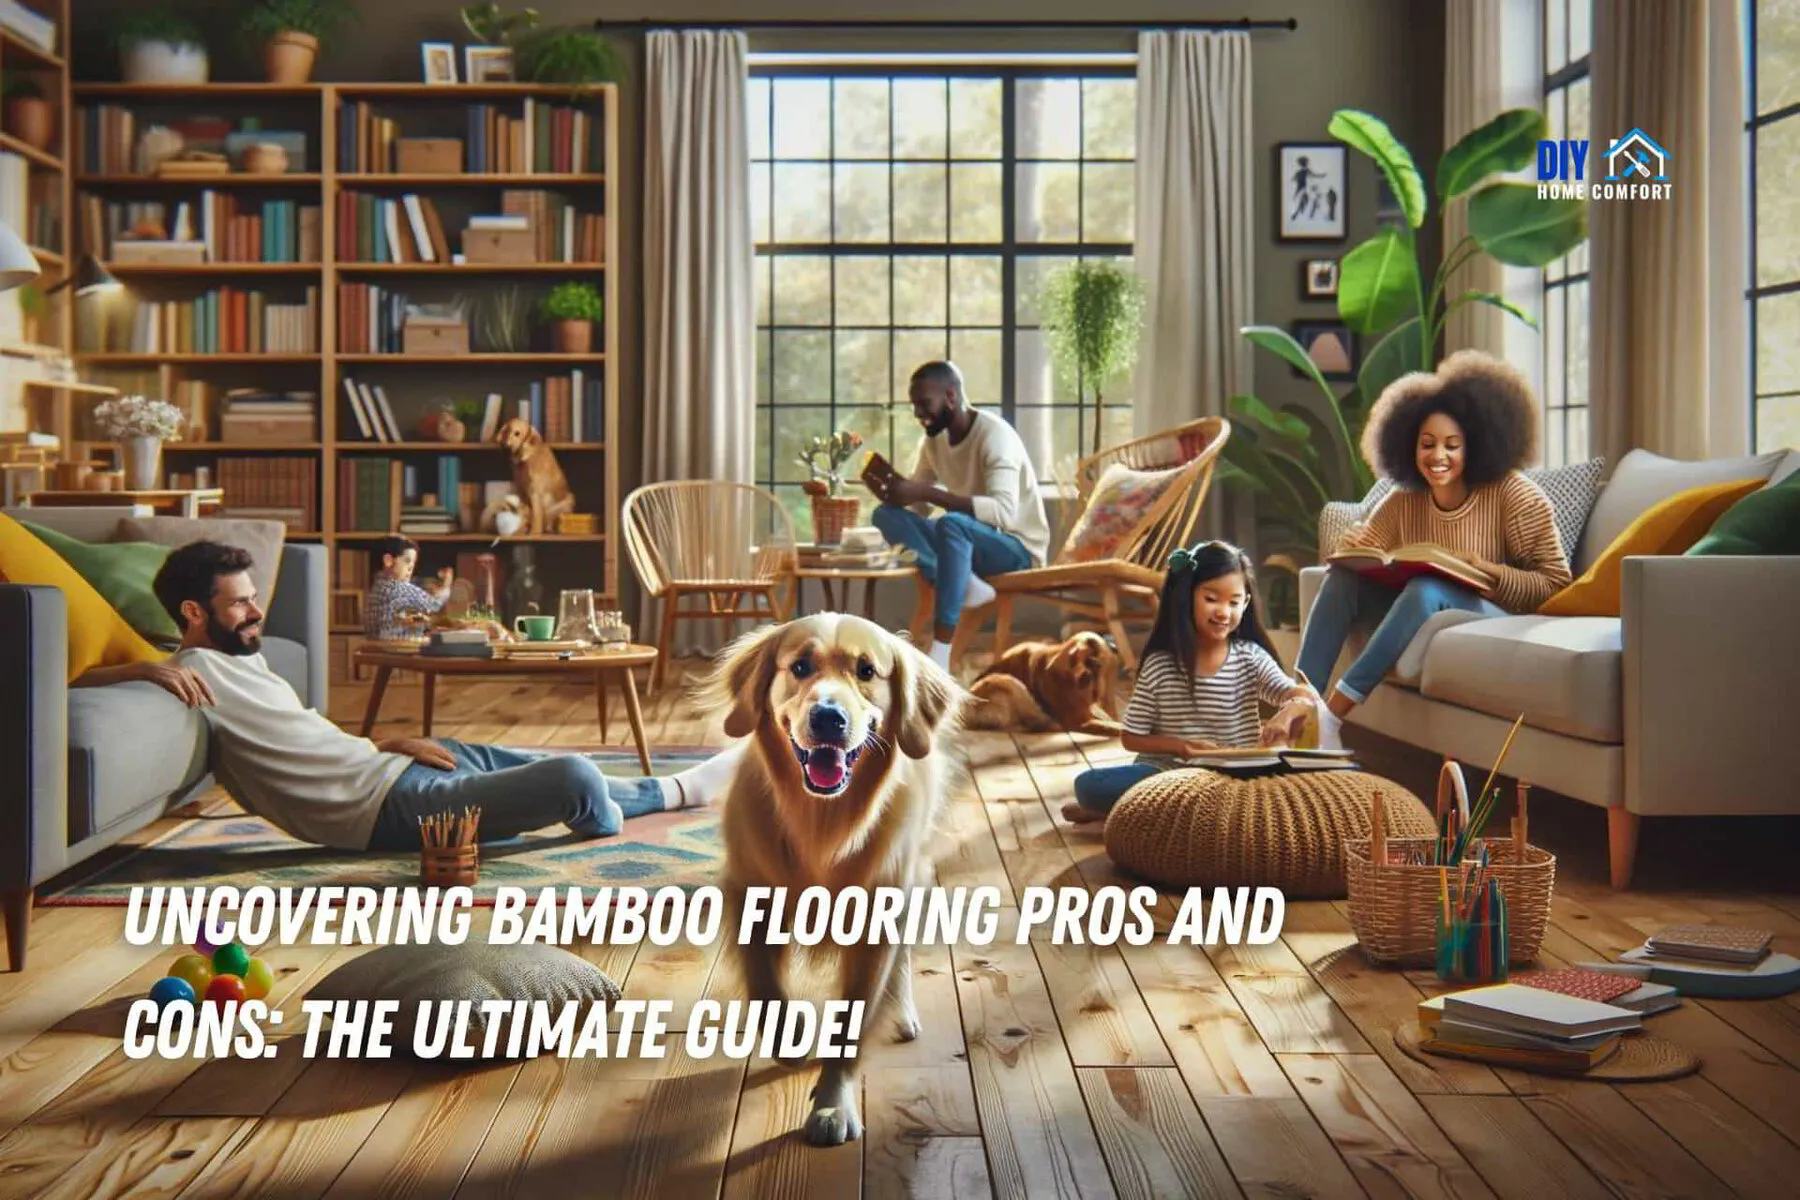 Uncovering Bamboo Flooring Pros and Cons: The Ultimate Guide for Homeowners | DIY Home Comfort